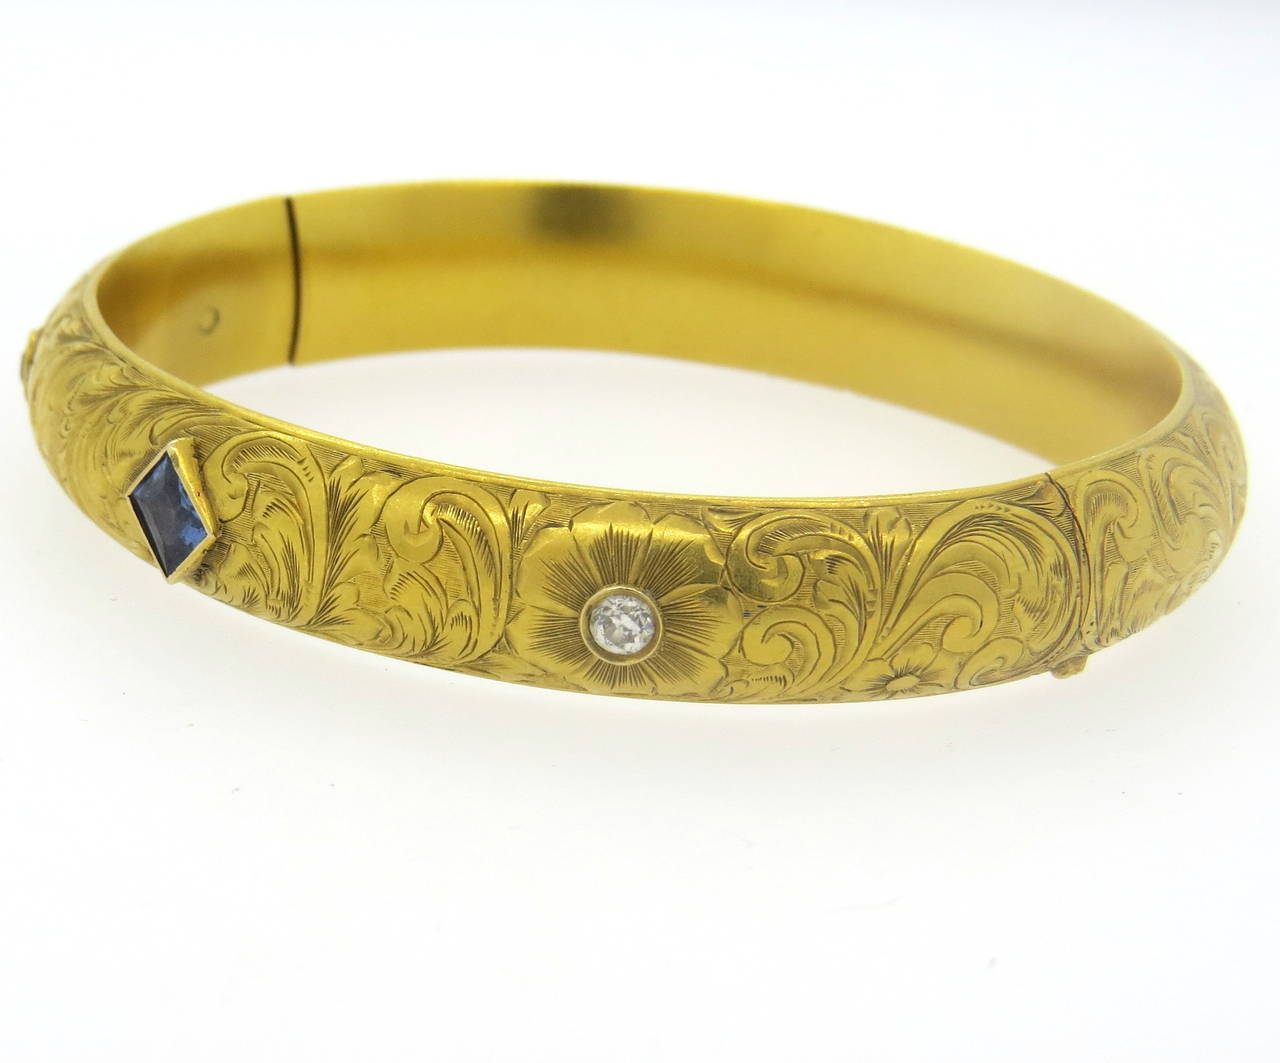 14k gold antique Victorian bangle bracelet, set with two old European cut diamonds (approx. 0.28ctw) and one sapphire. Bangle will fit up to 7